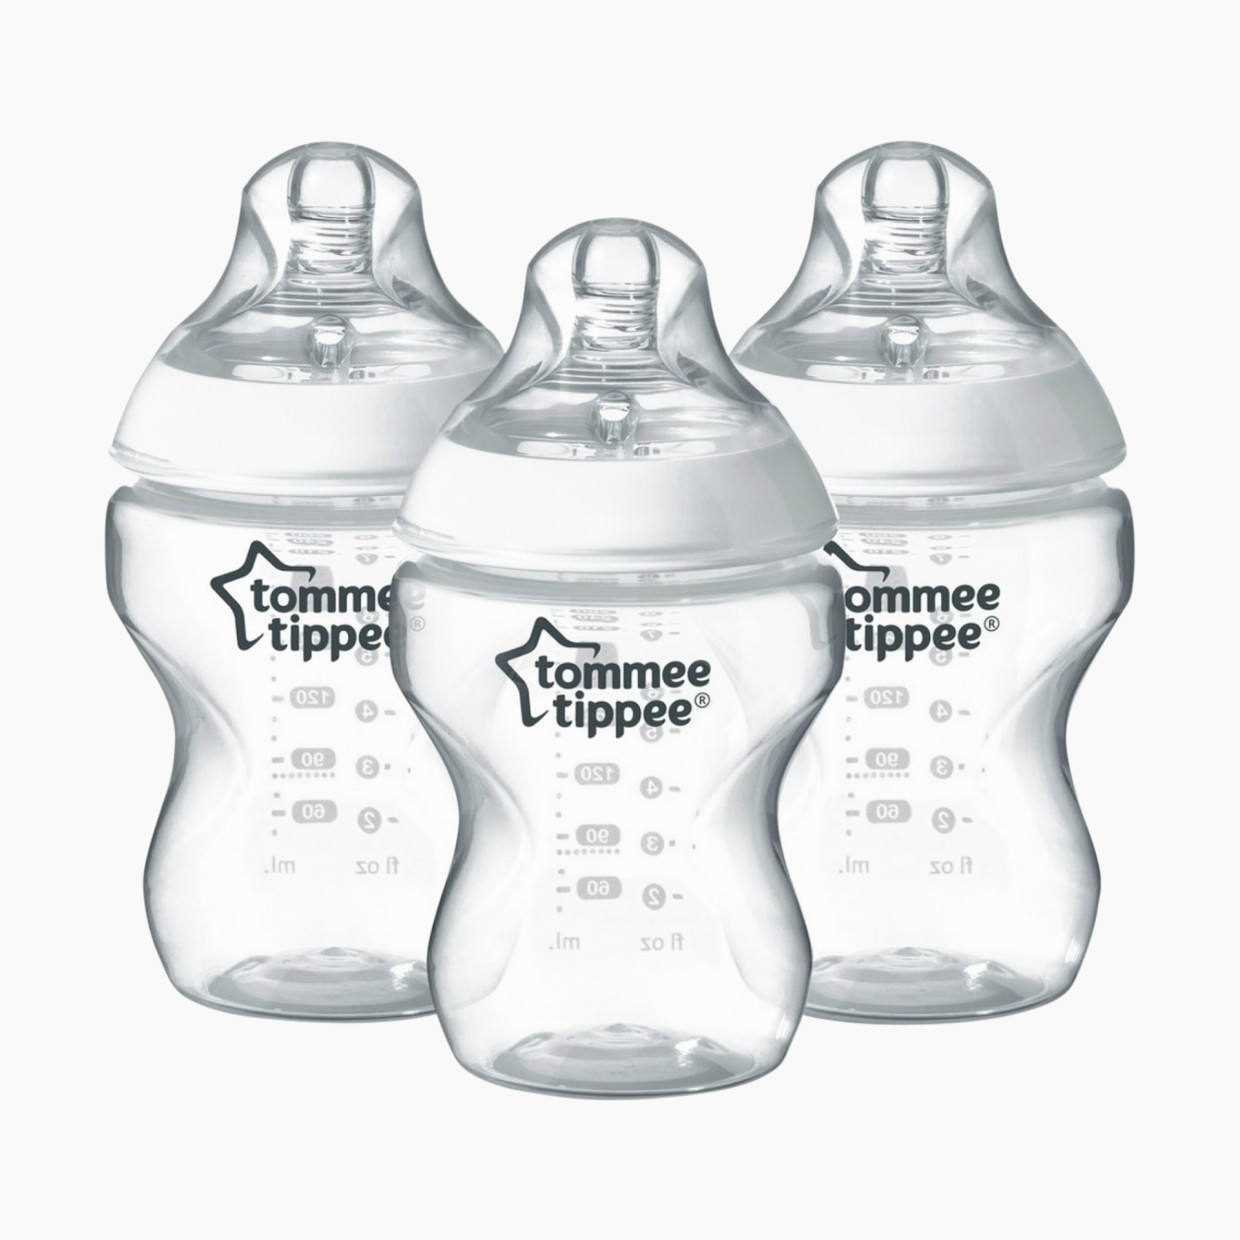 Tommee Tippee Closer to Nature Bottle review